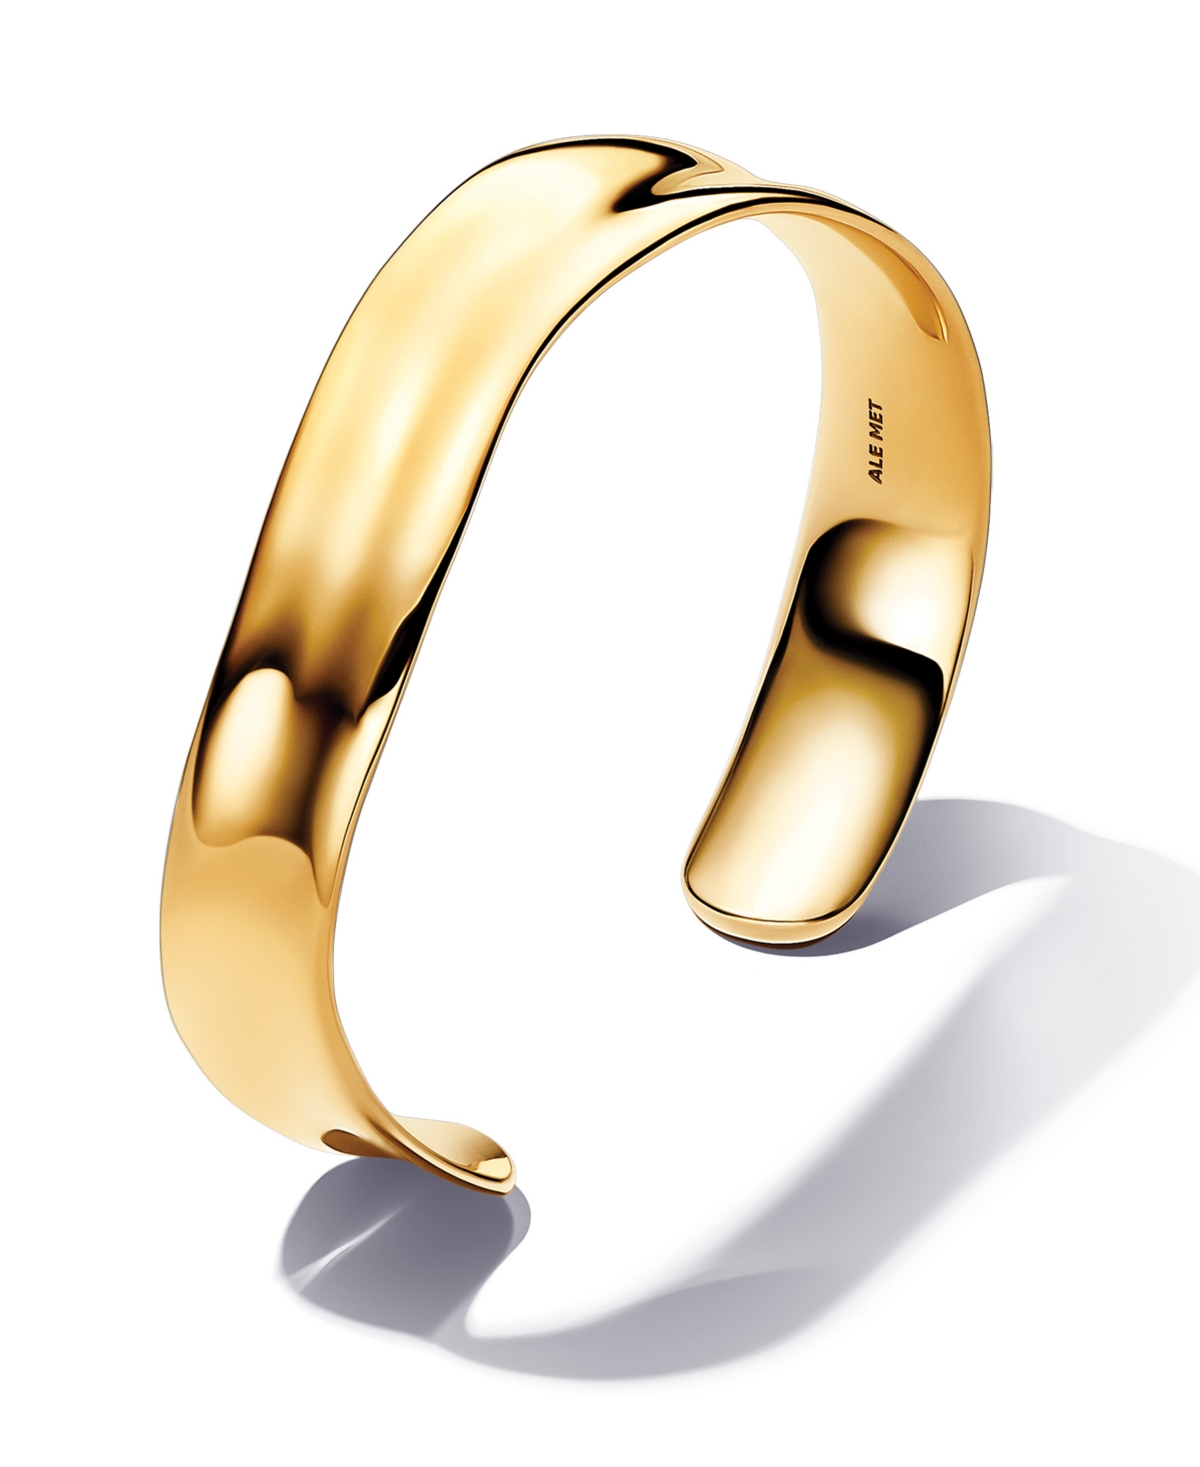 in 14k Gold-plated Shaped Broad Open Bangle - Gold